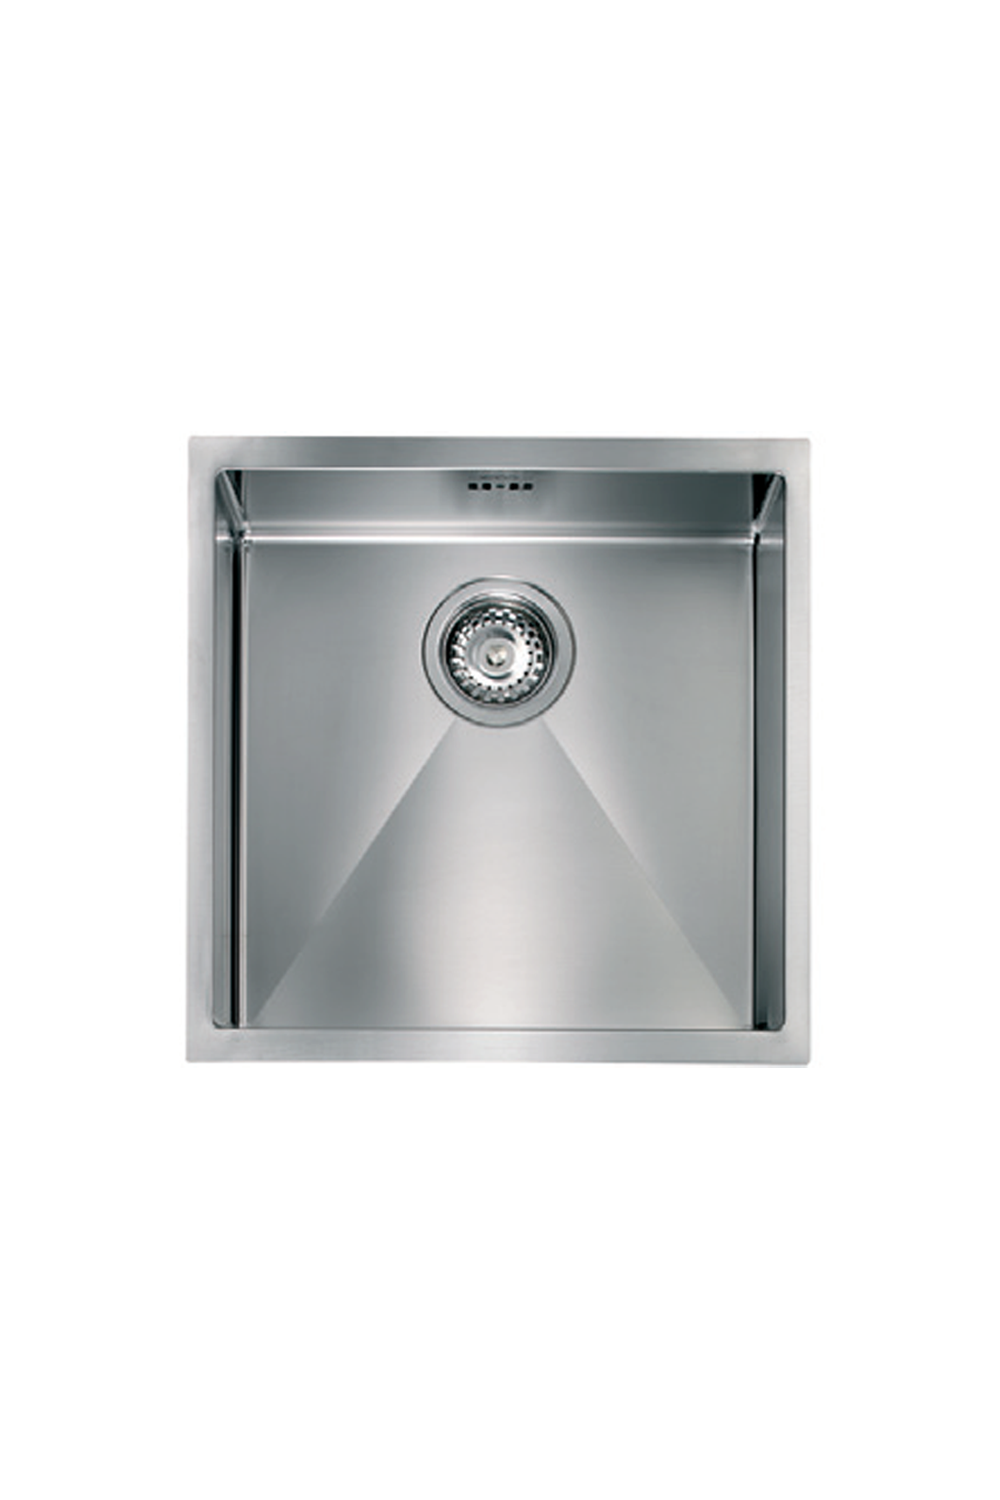 LUISINA 400mm R10-Corner Square Stainless Steel Sink 意大利製造小圓角不銹鋼星盆 | Made in Italy |